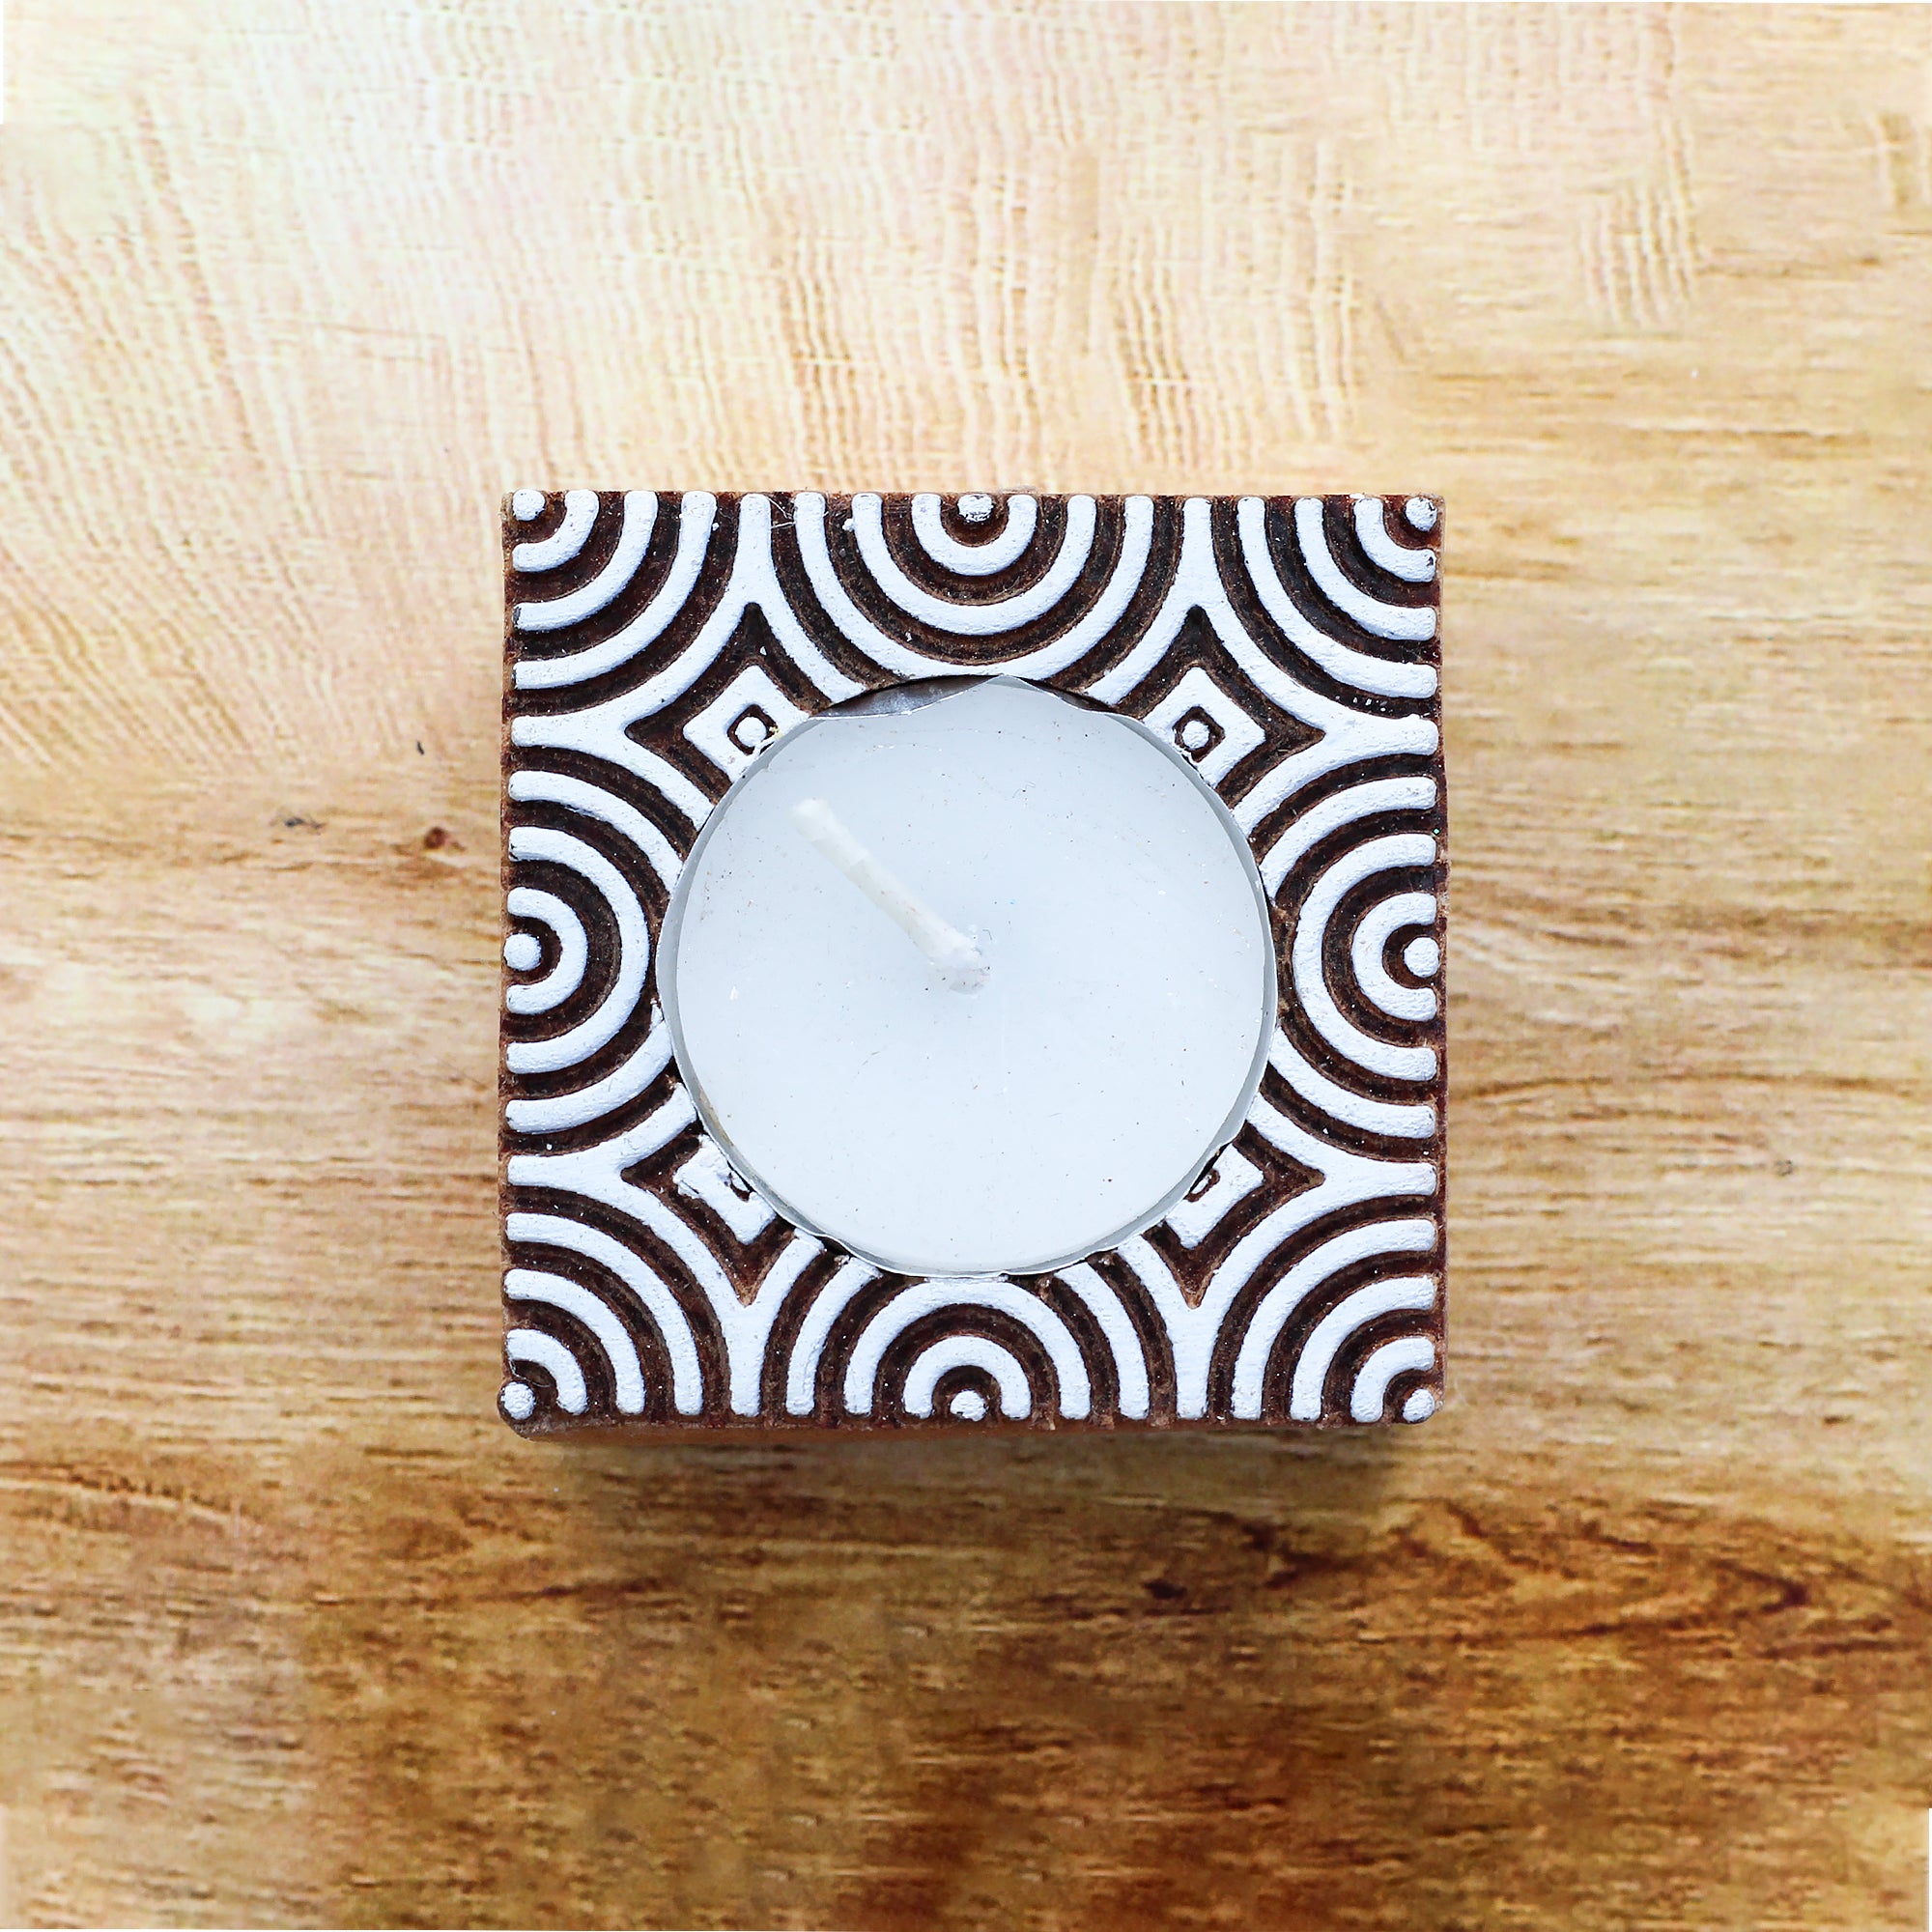 Wooden Printing Block & Candle Holder- Concentric Circles